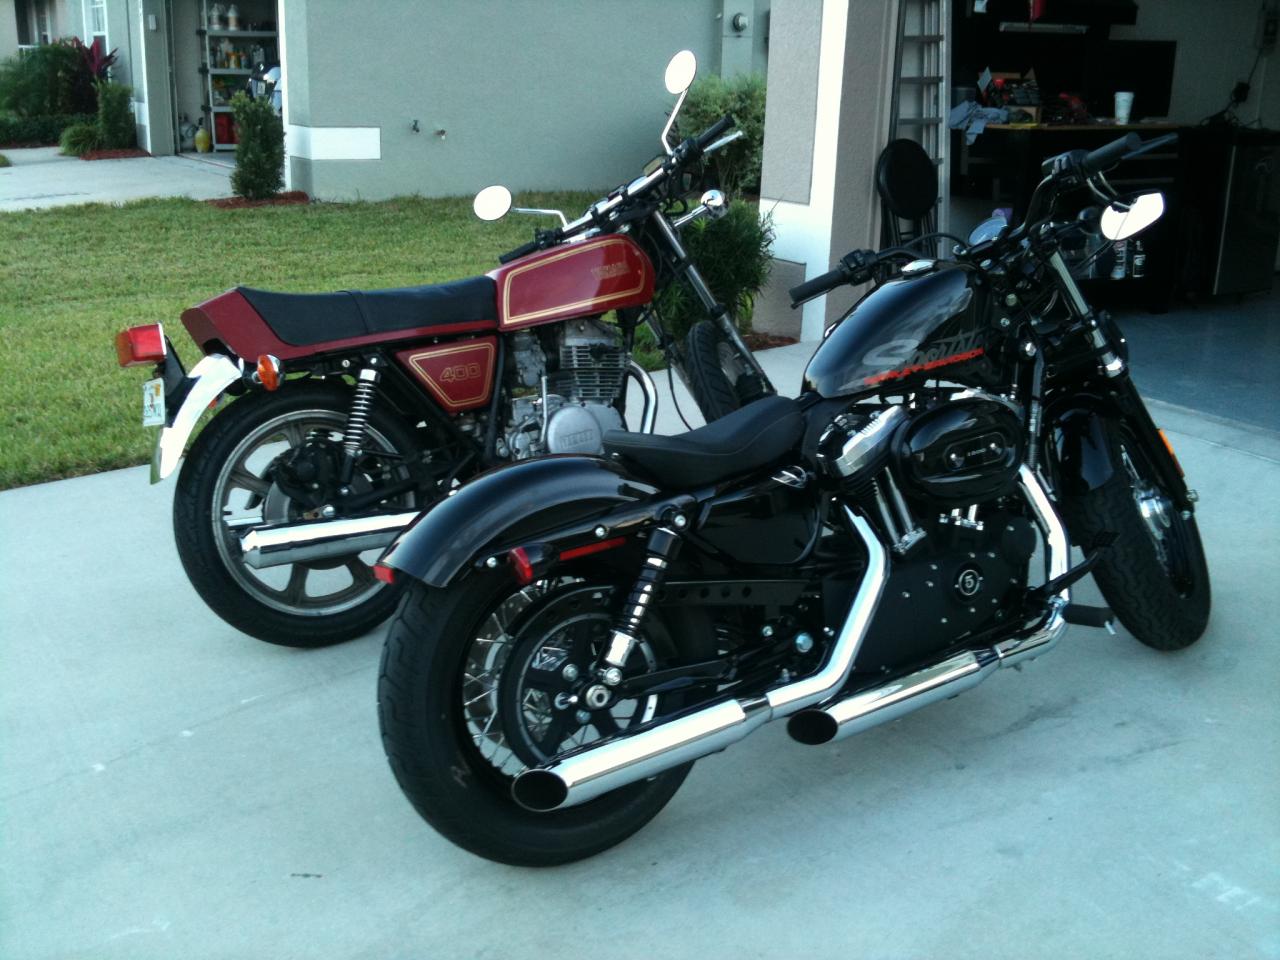 My 1977 Yamaha XS400 and 2010 Harley Sportster 48